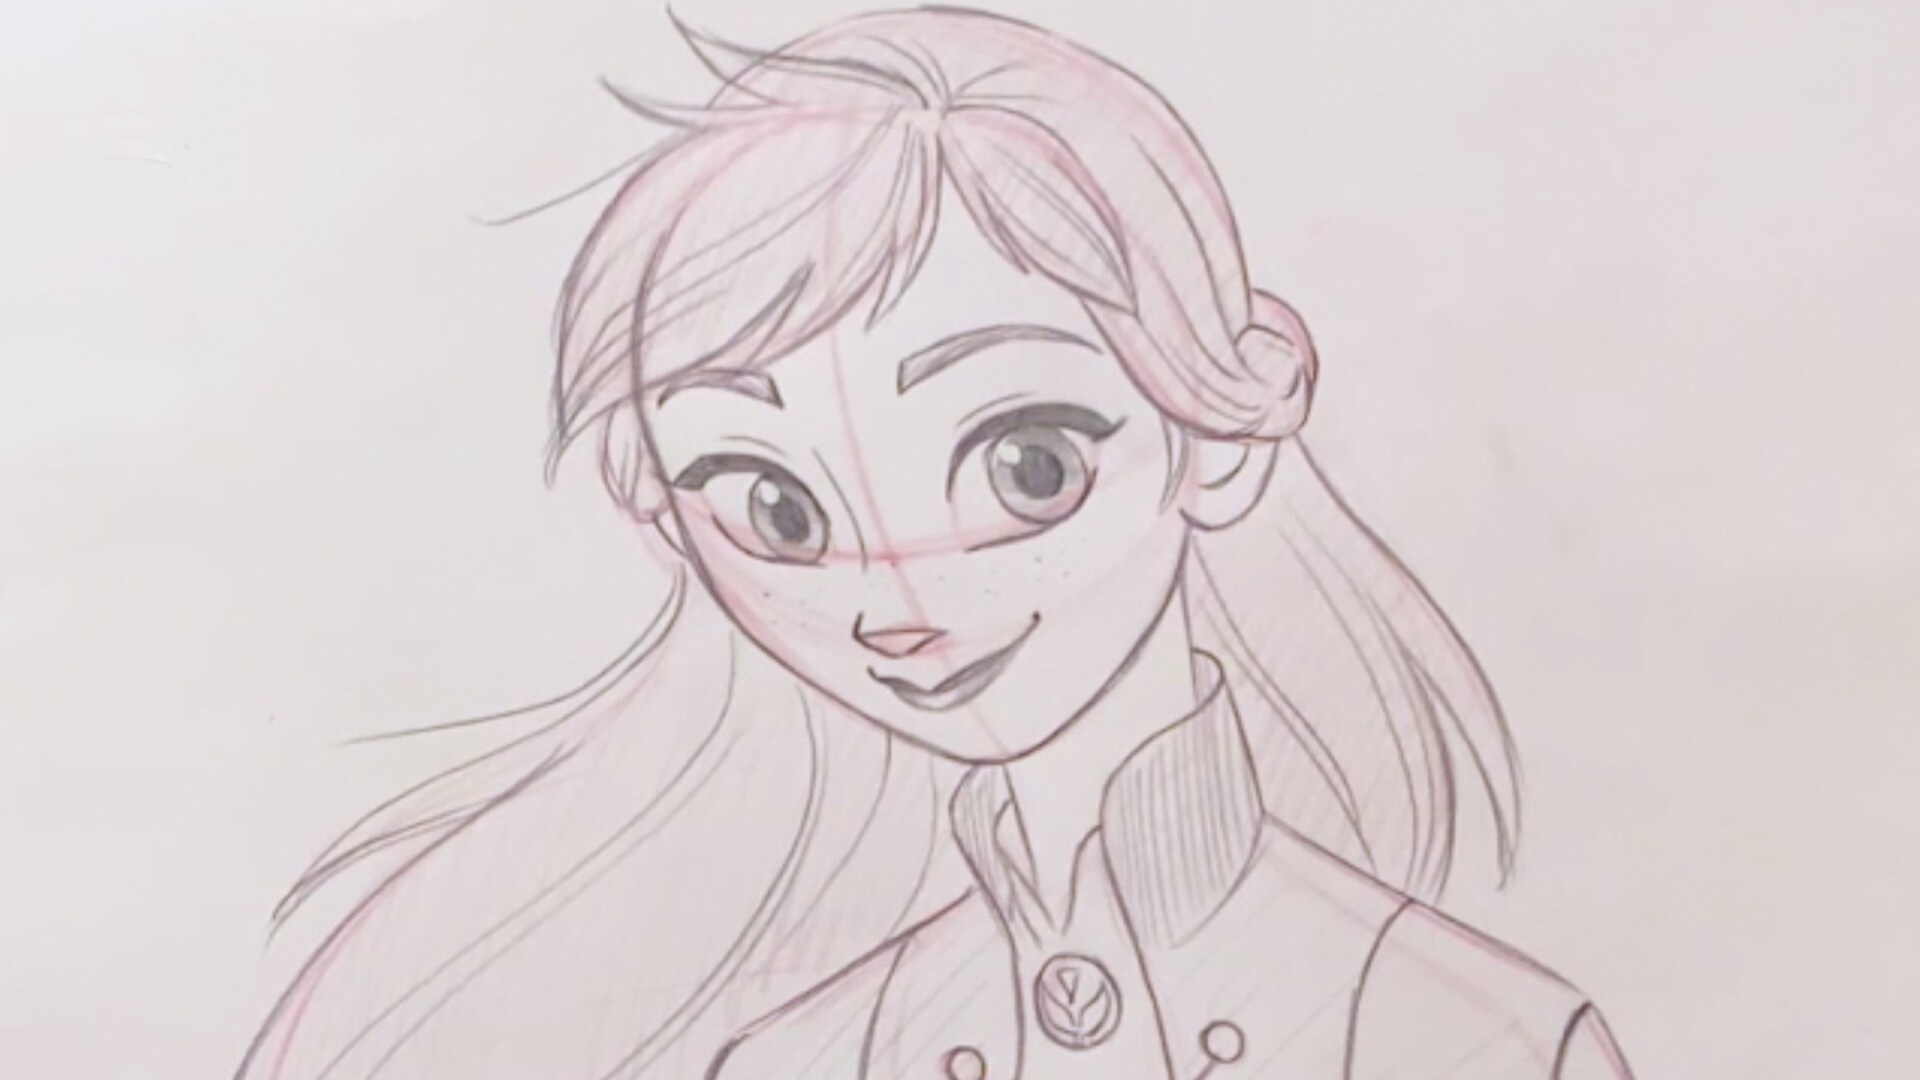 How to draw Elsa and Anna with easy step by step tutorials